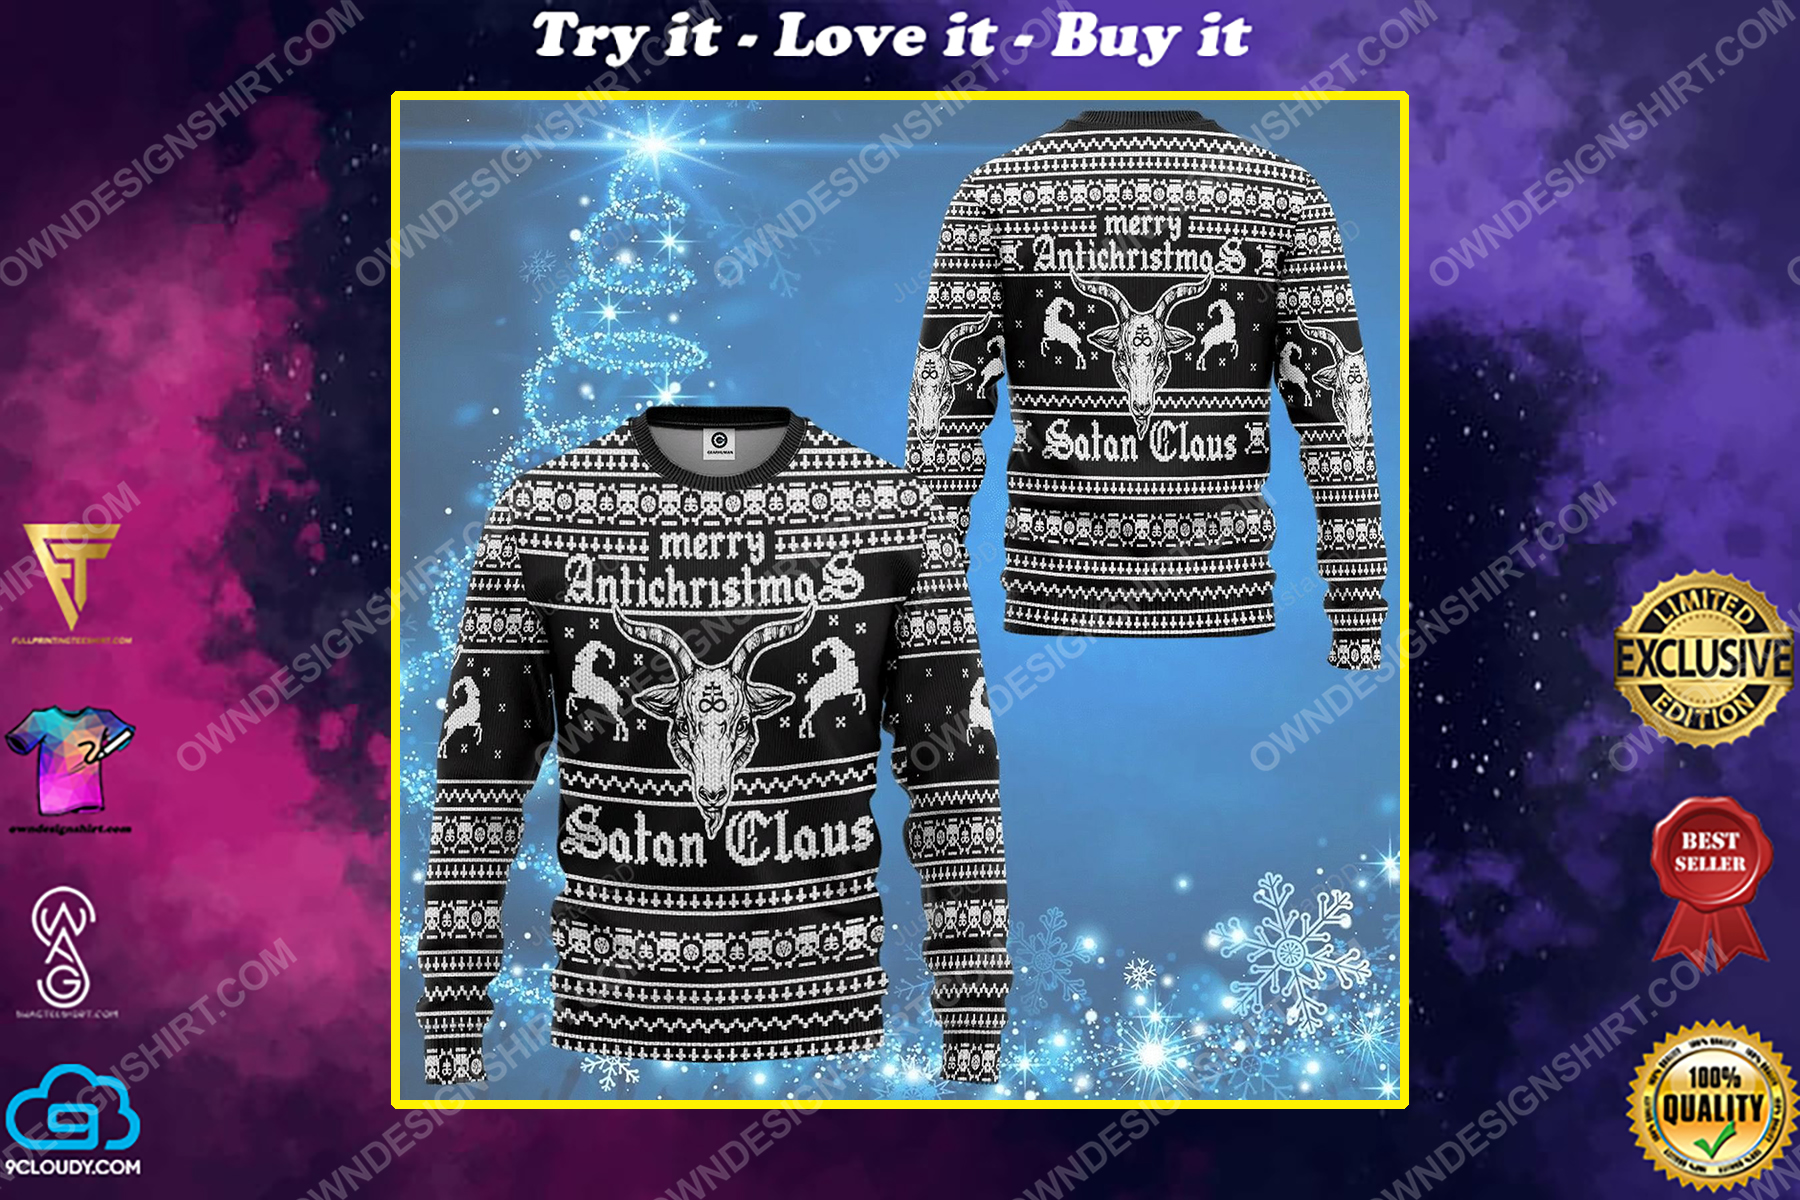 Merry antichristmas satan claus ugly christmas sweater